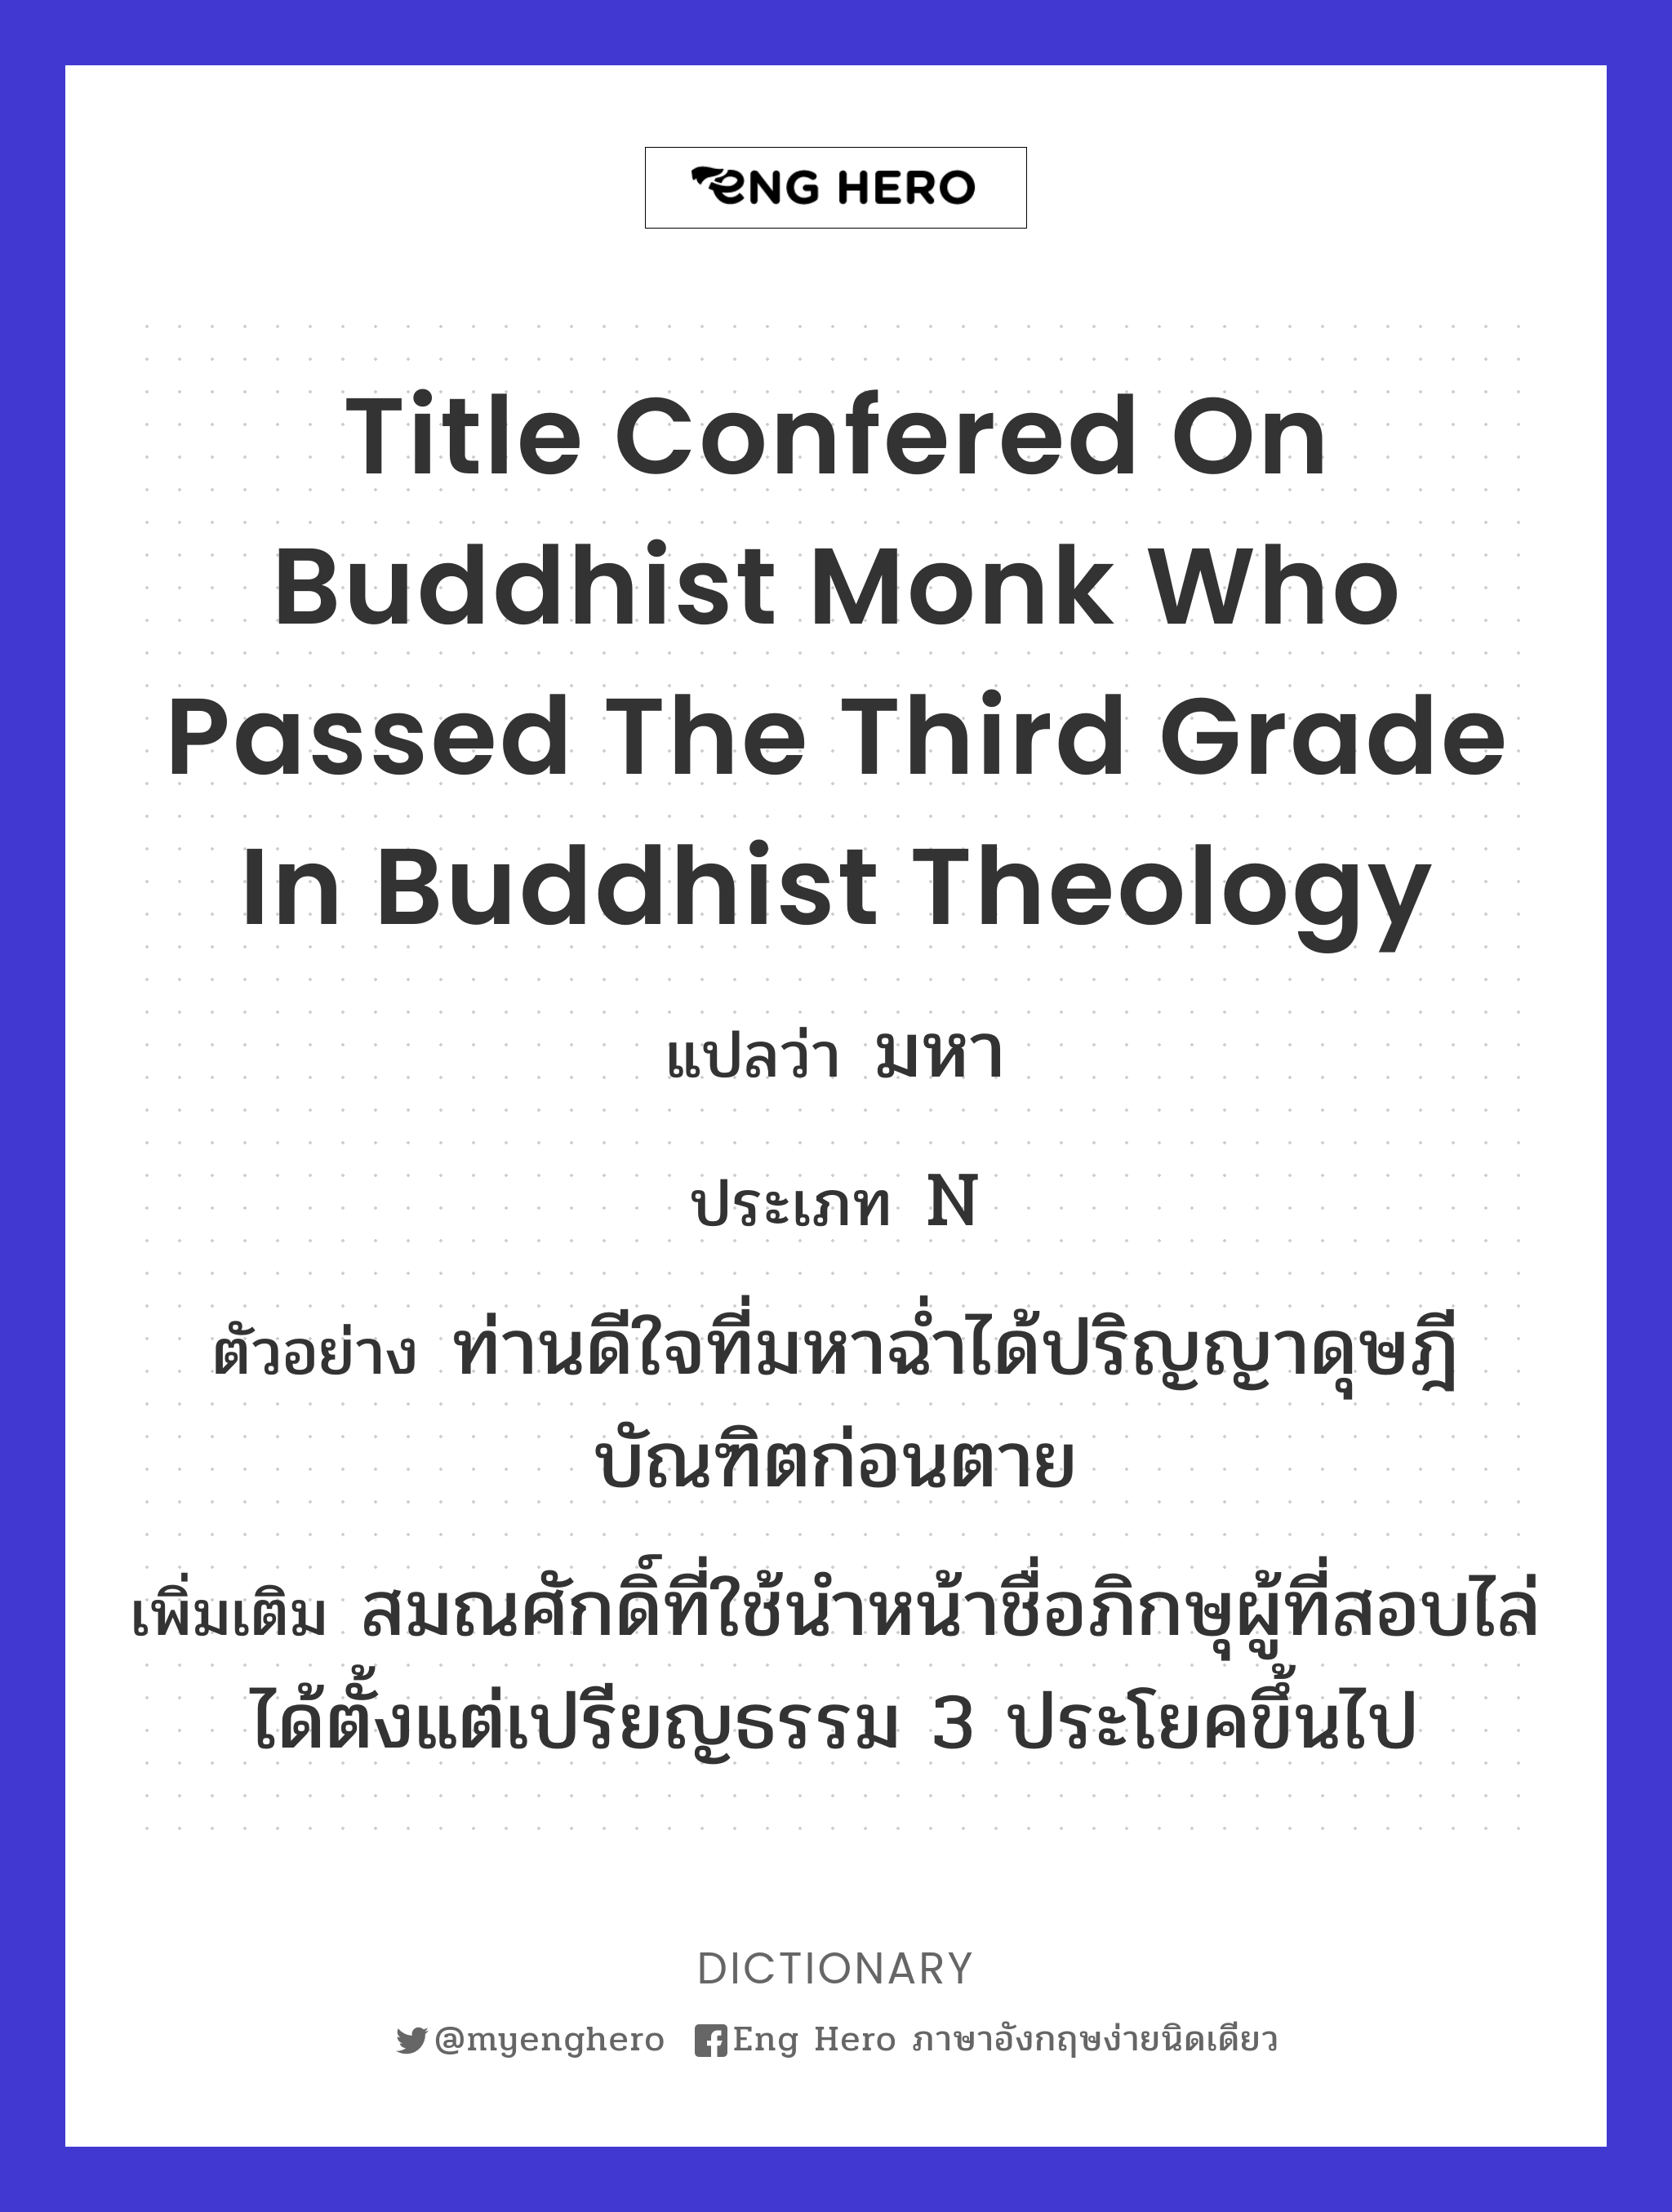 title confered on Buddhist monk who passed the third grade in Buddhist theology